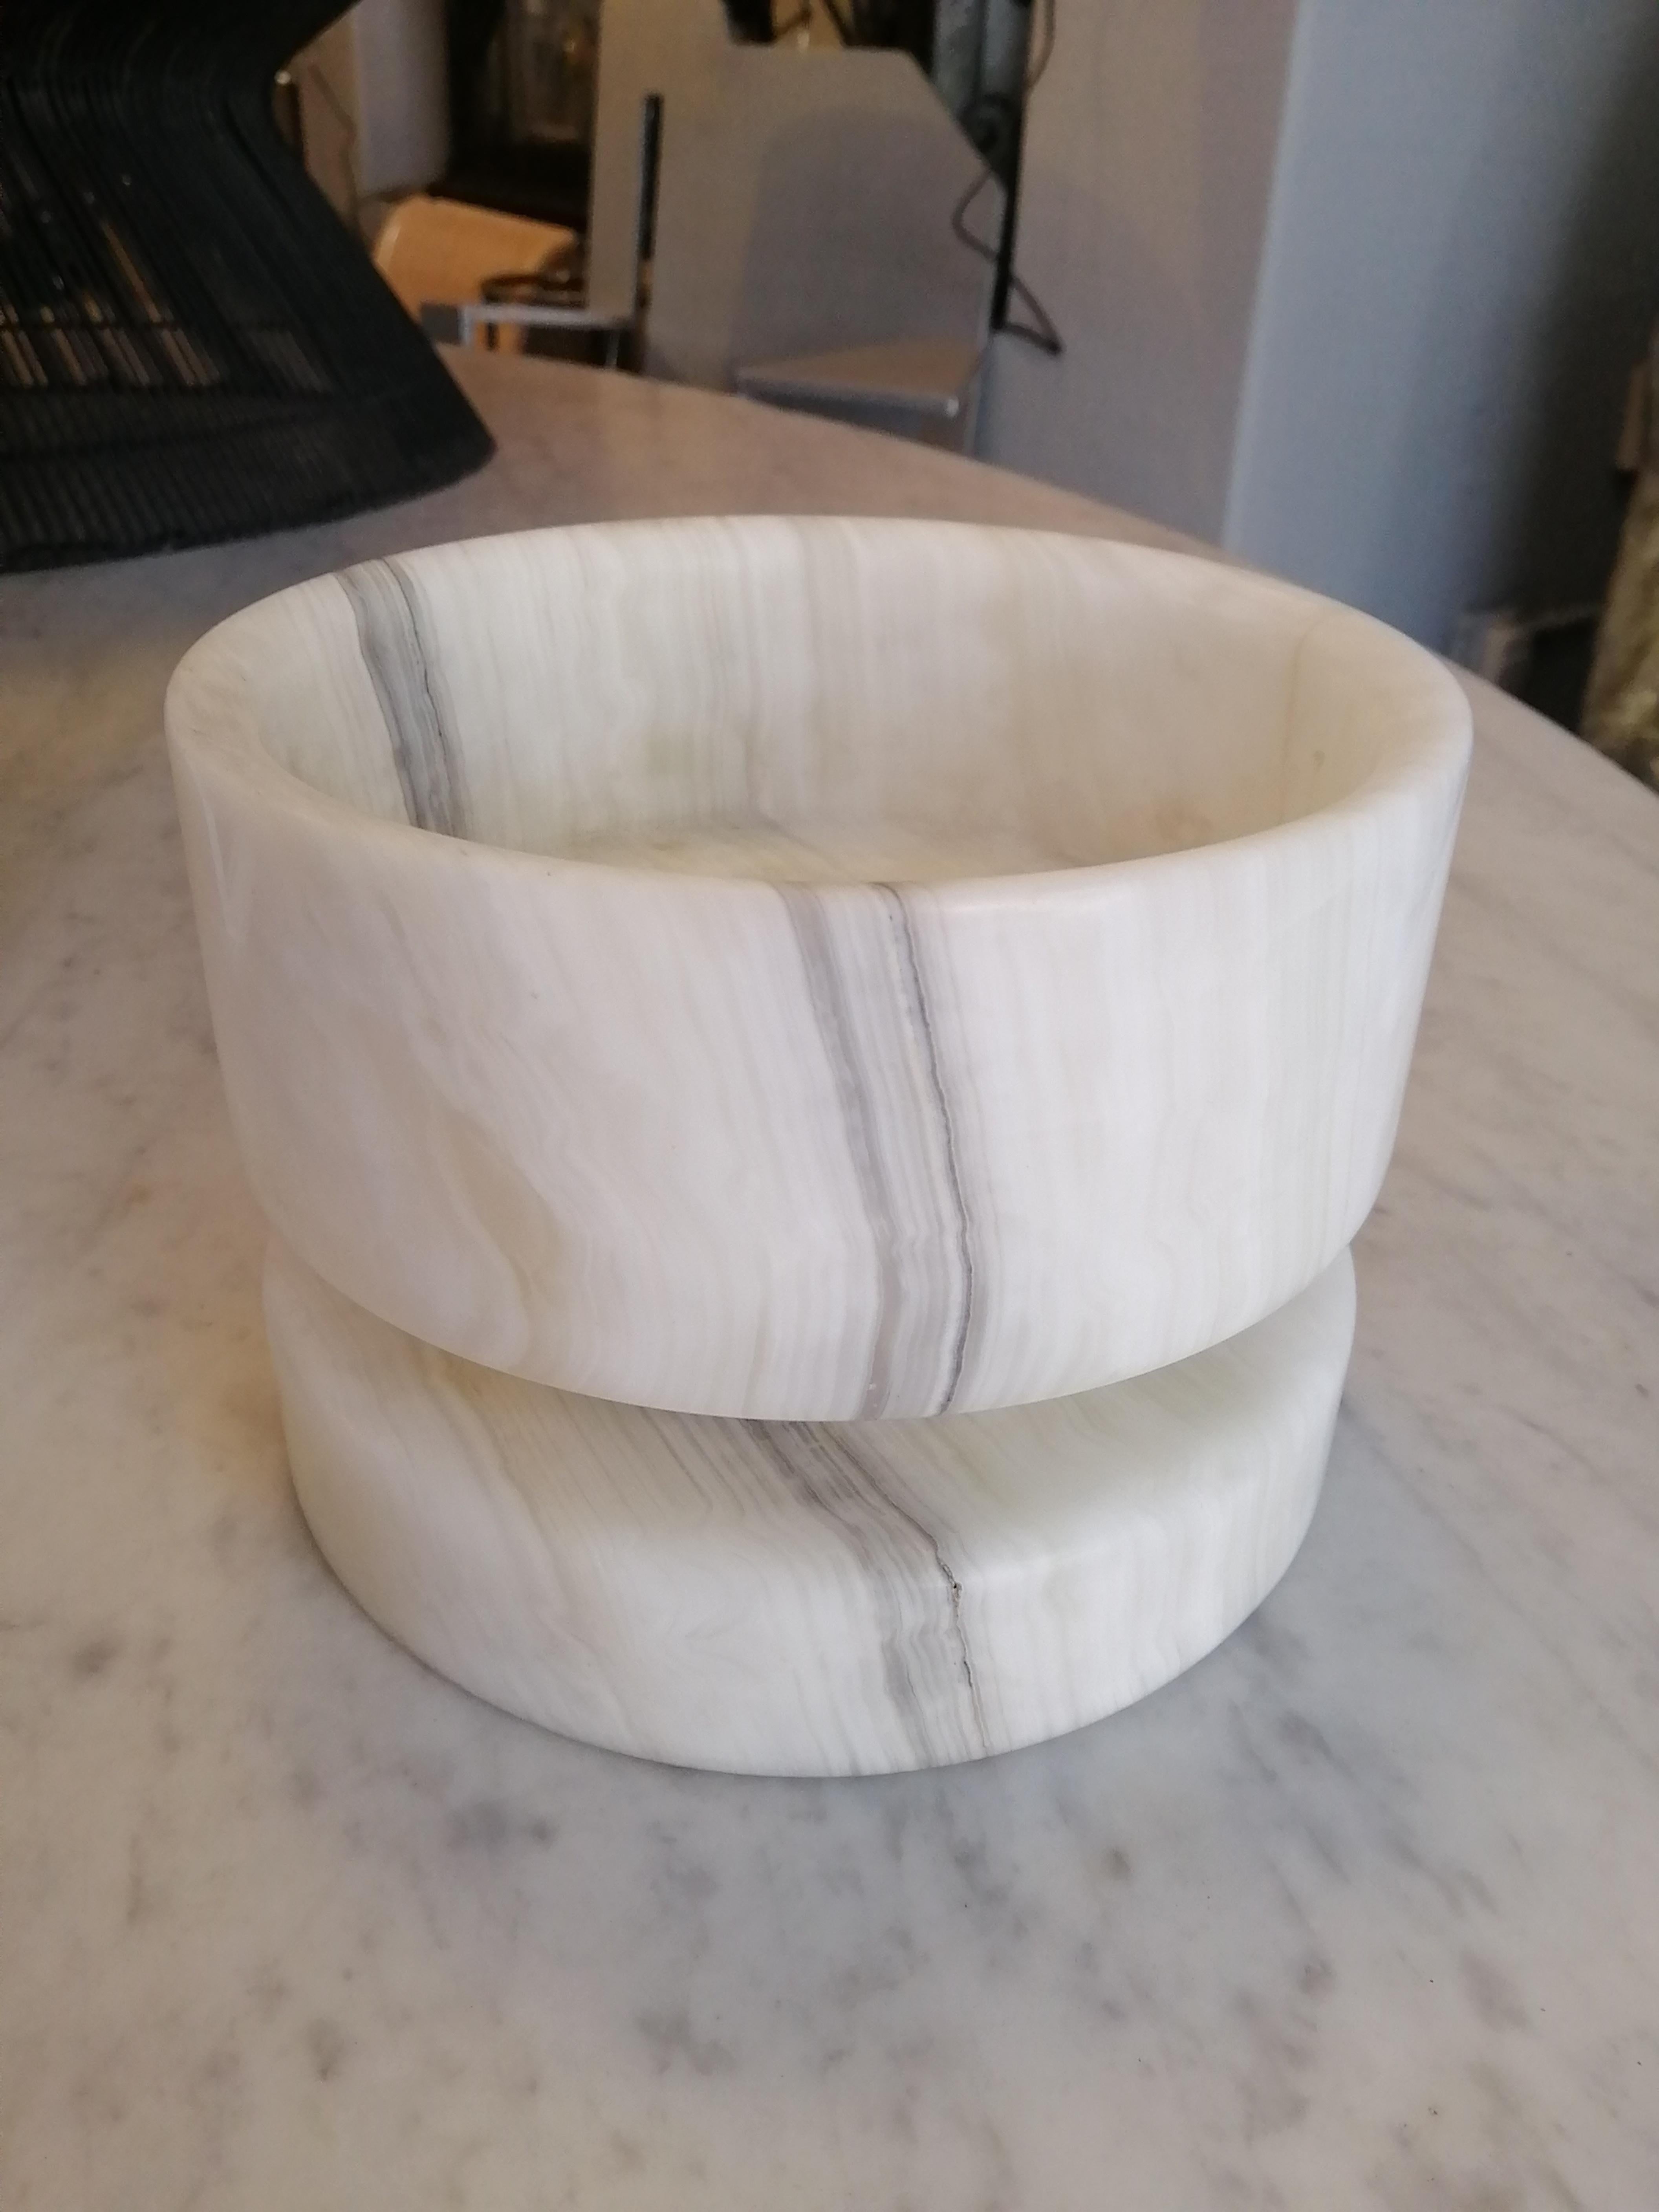 An Italian marble bowl by Angelo Mangiarotti. Manufactured by Knoll, circa 1965. The bowl shows its original sticker on the bottom.

Dimensions: 
14.8 x 20.4 cm. Ø (5.8 x 8 inches Ø).